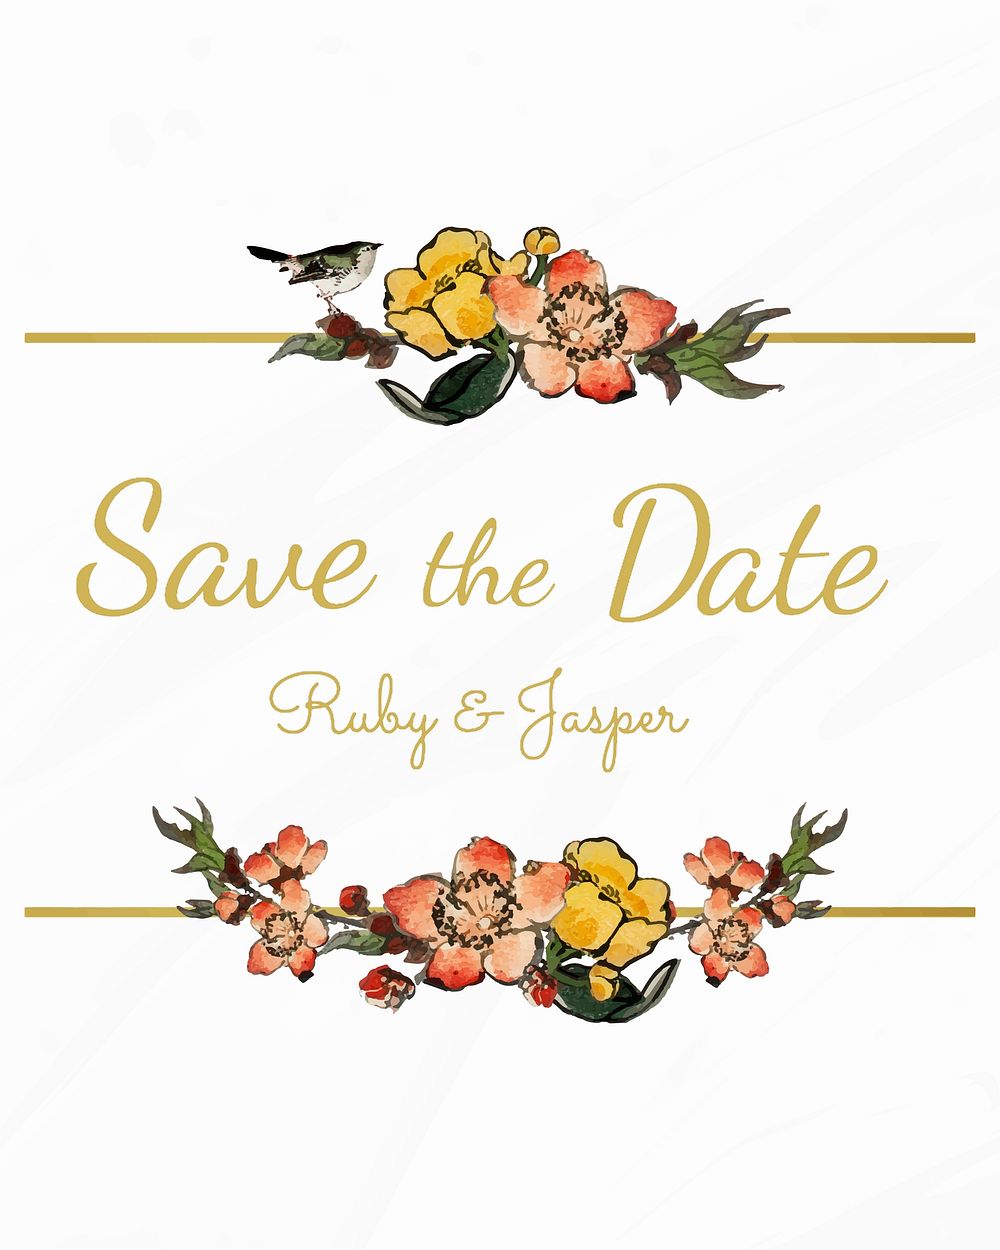 Save the date with floral design vector